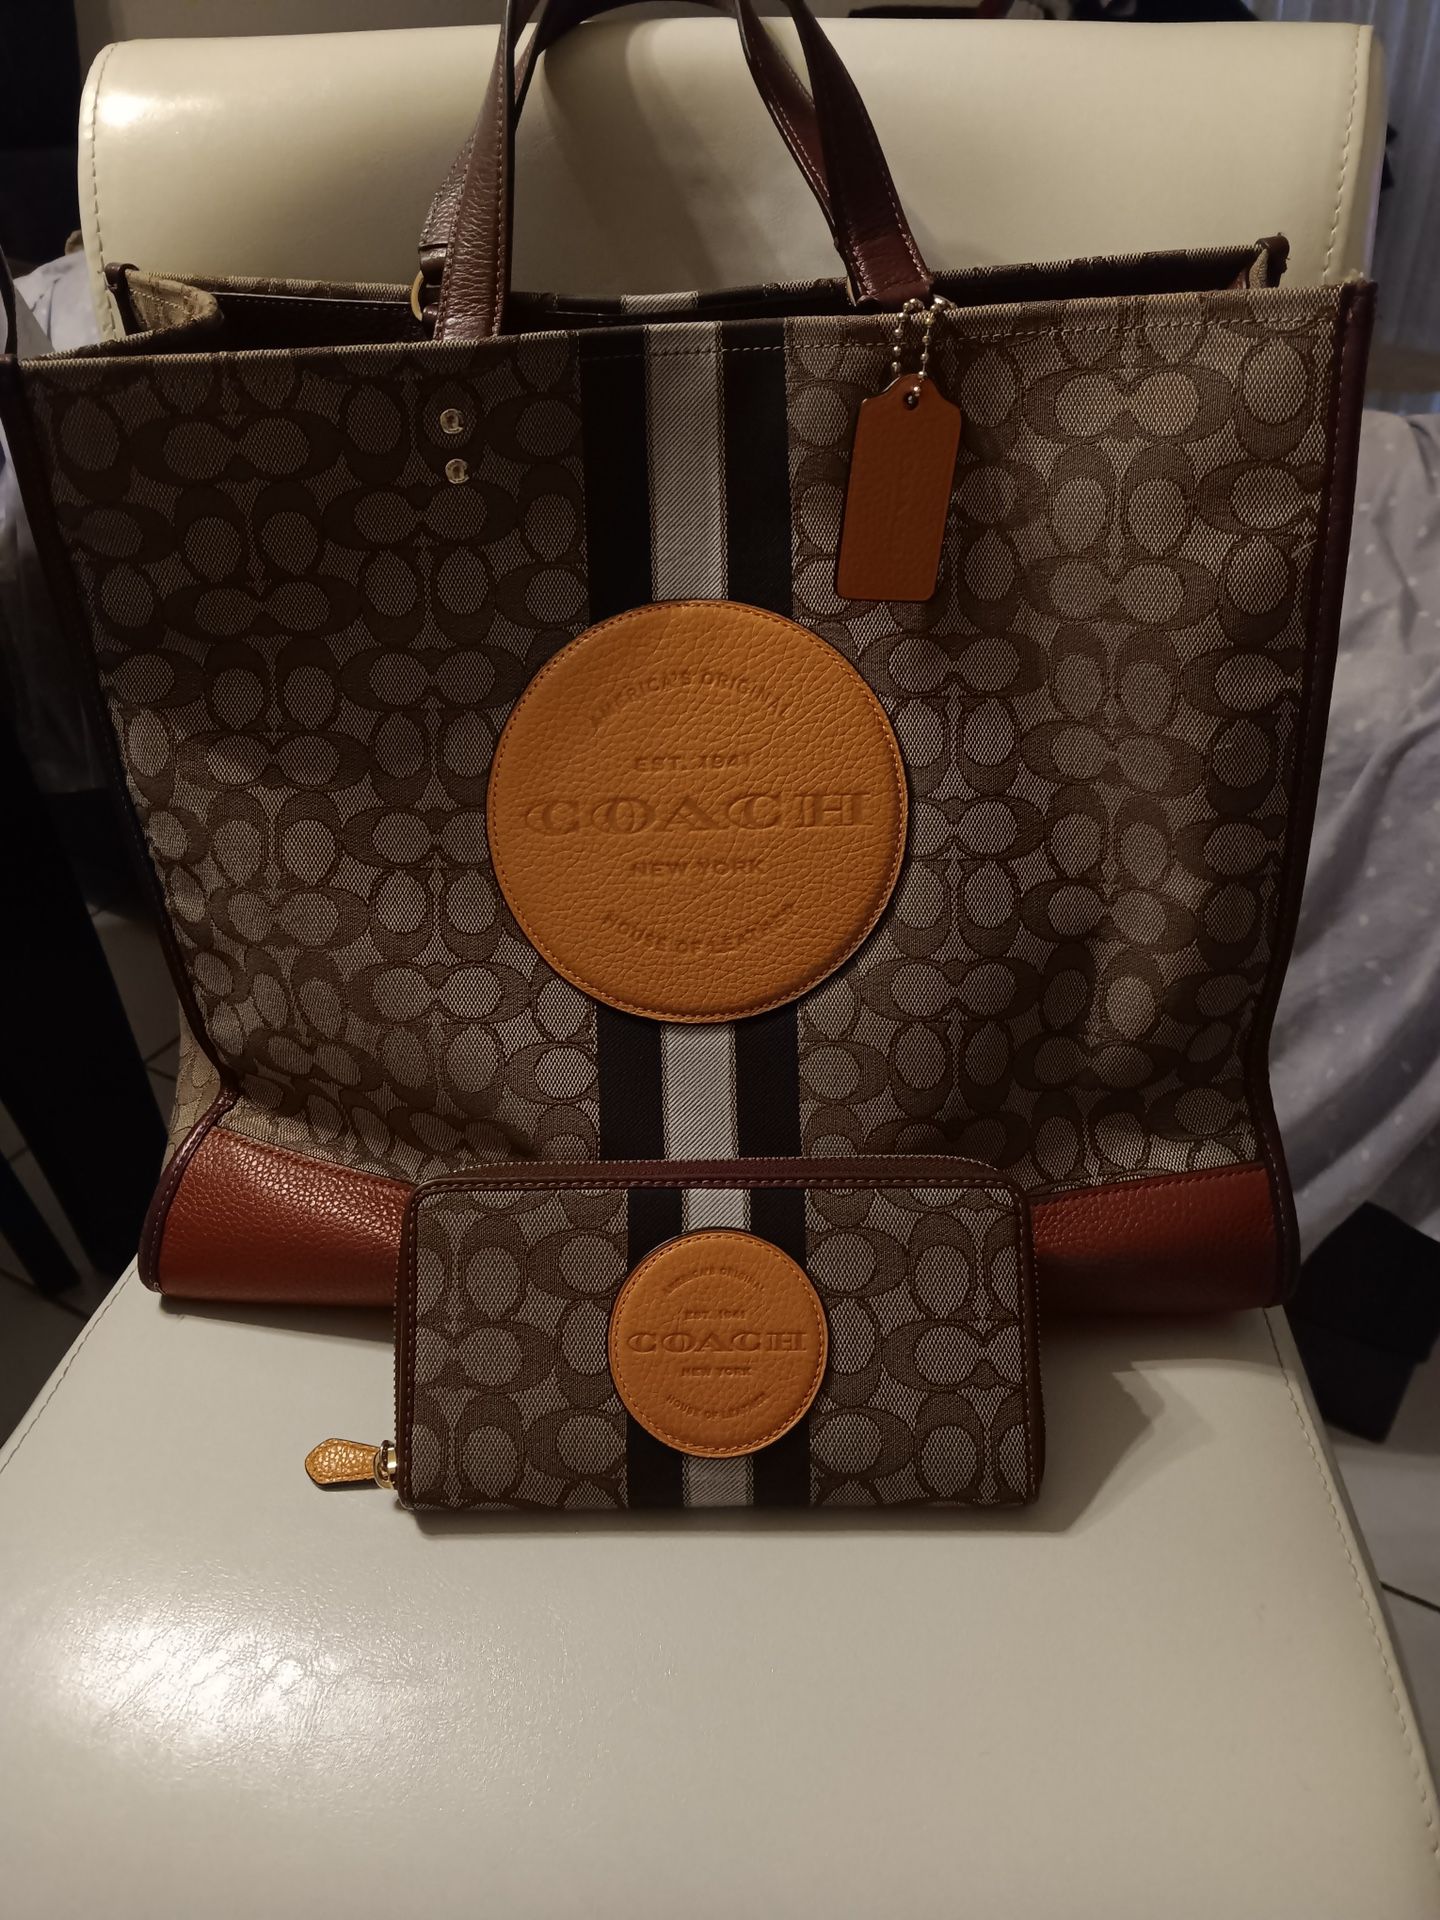 Authentic Coach Purse And Wallet Both For $300 Obo